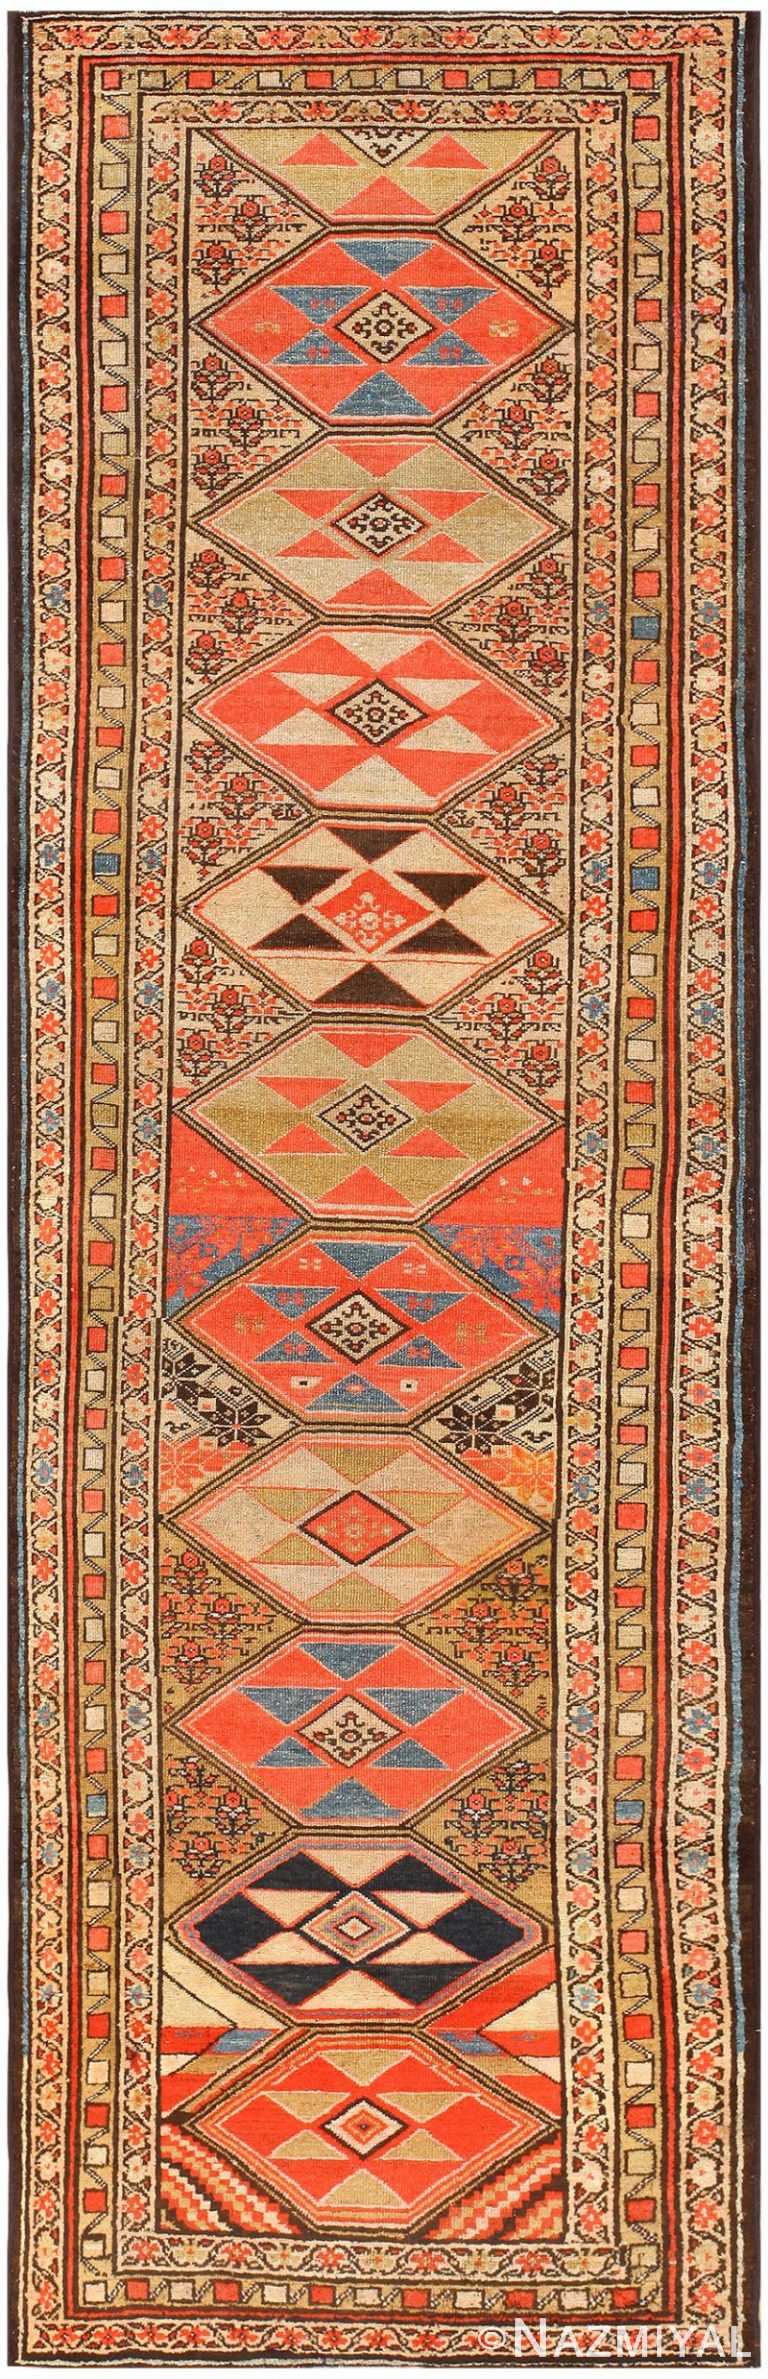 Antique Persian Malayer Runner Rug 48342 Detail/Large View